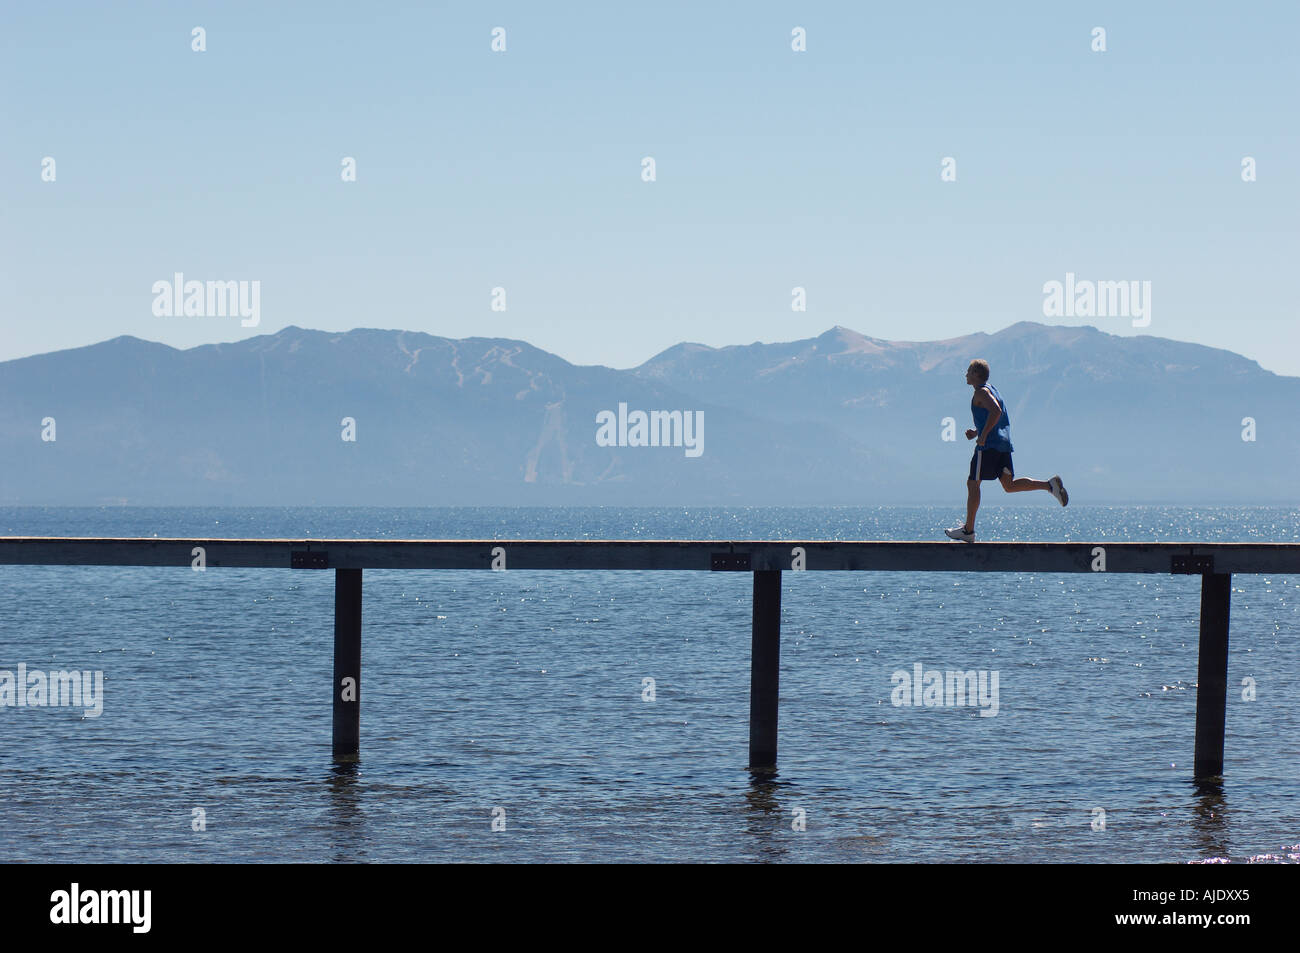 Man running along pier with mountains behind, side view Stock Photo